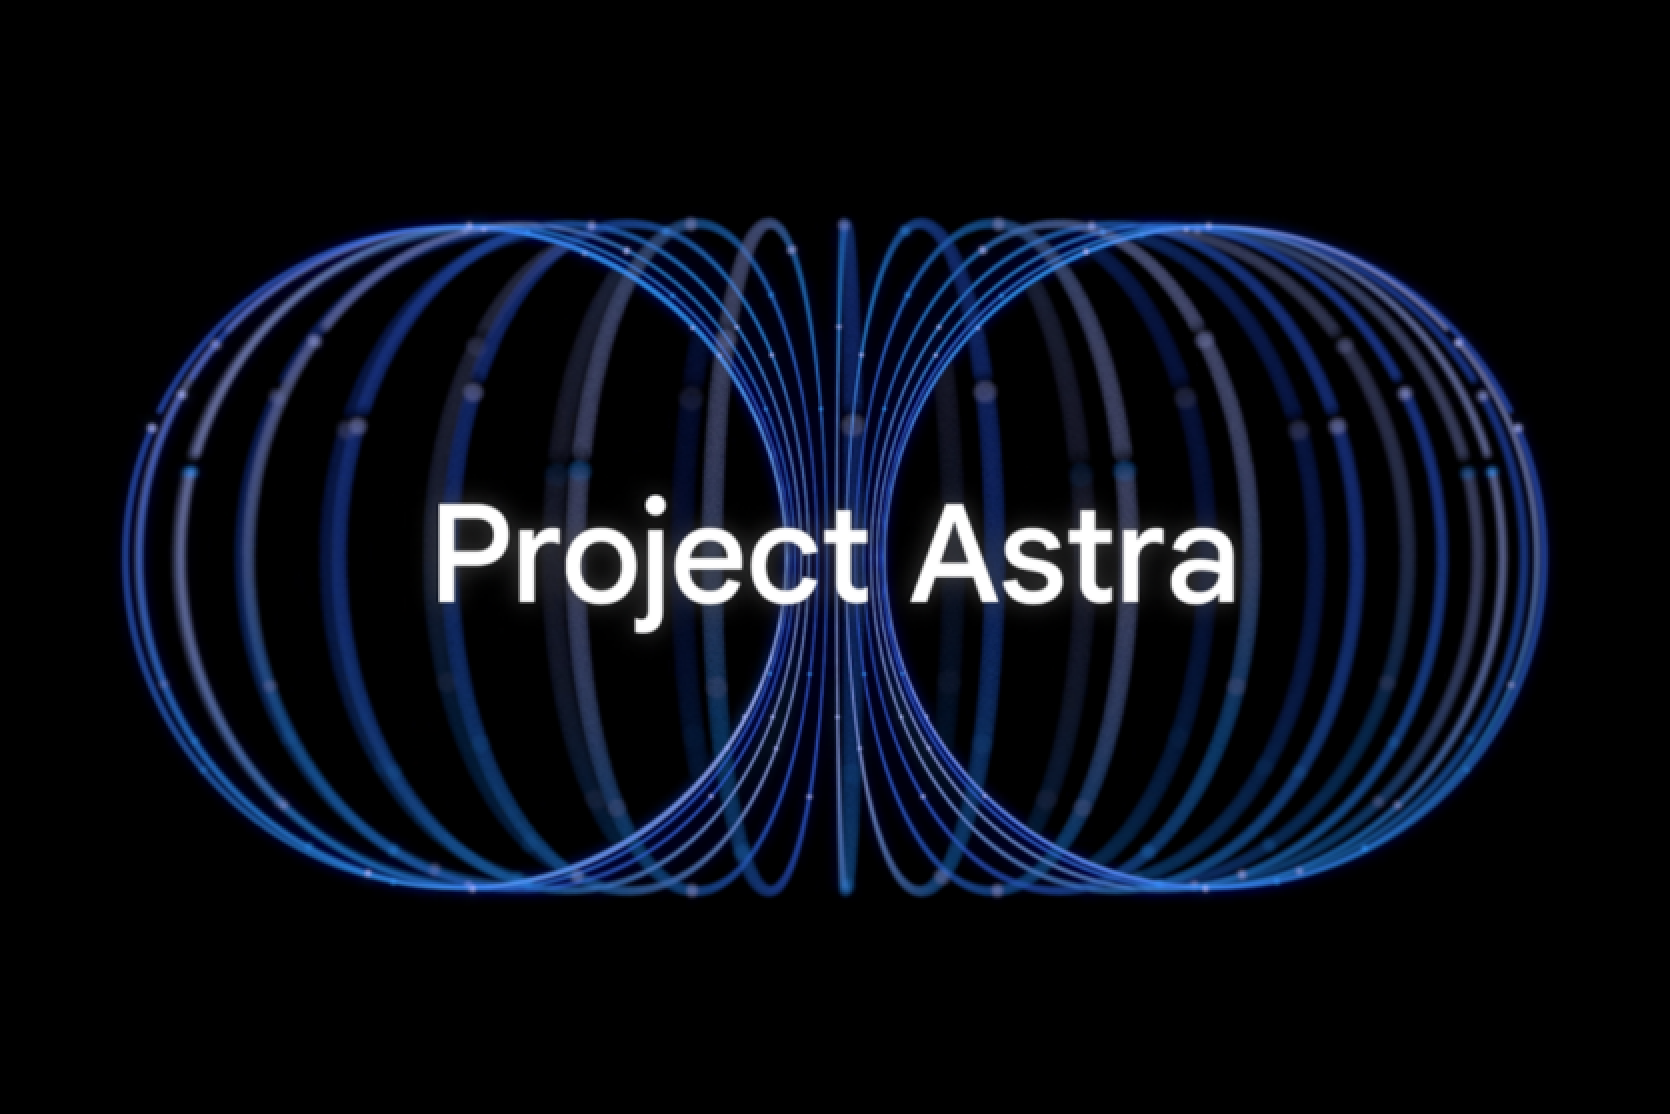 Google showed off Project Astra, an AI assistant with voice and visual recognition similar to GPT-4o